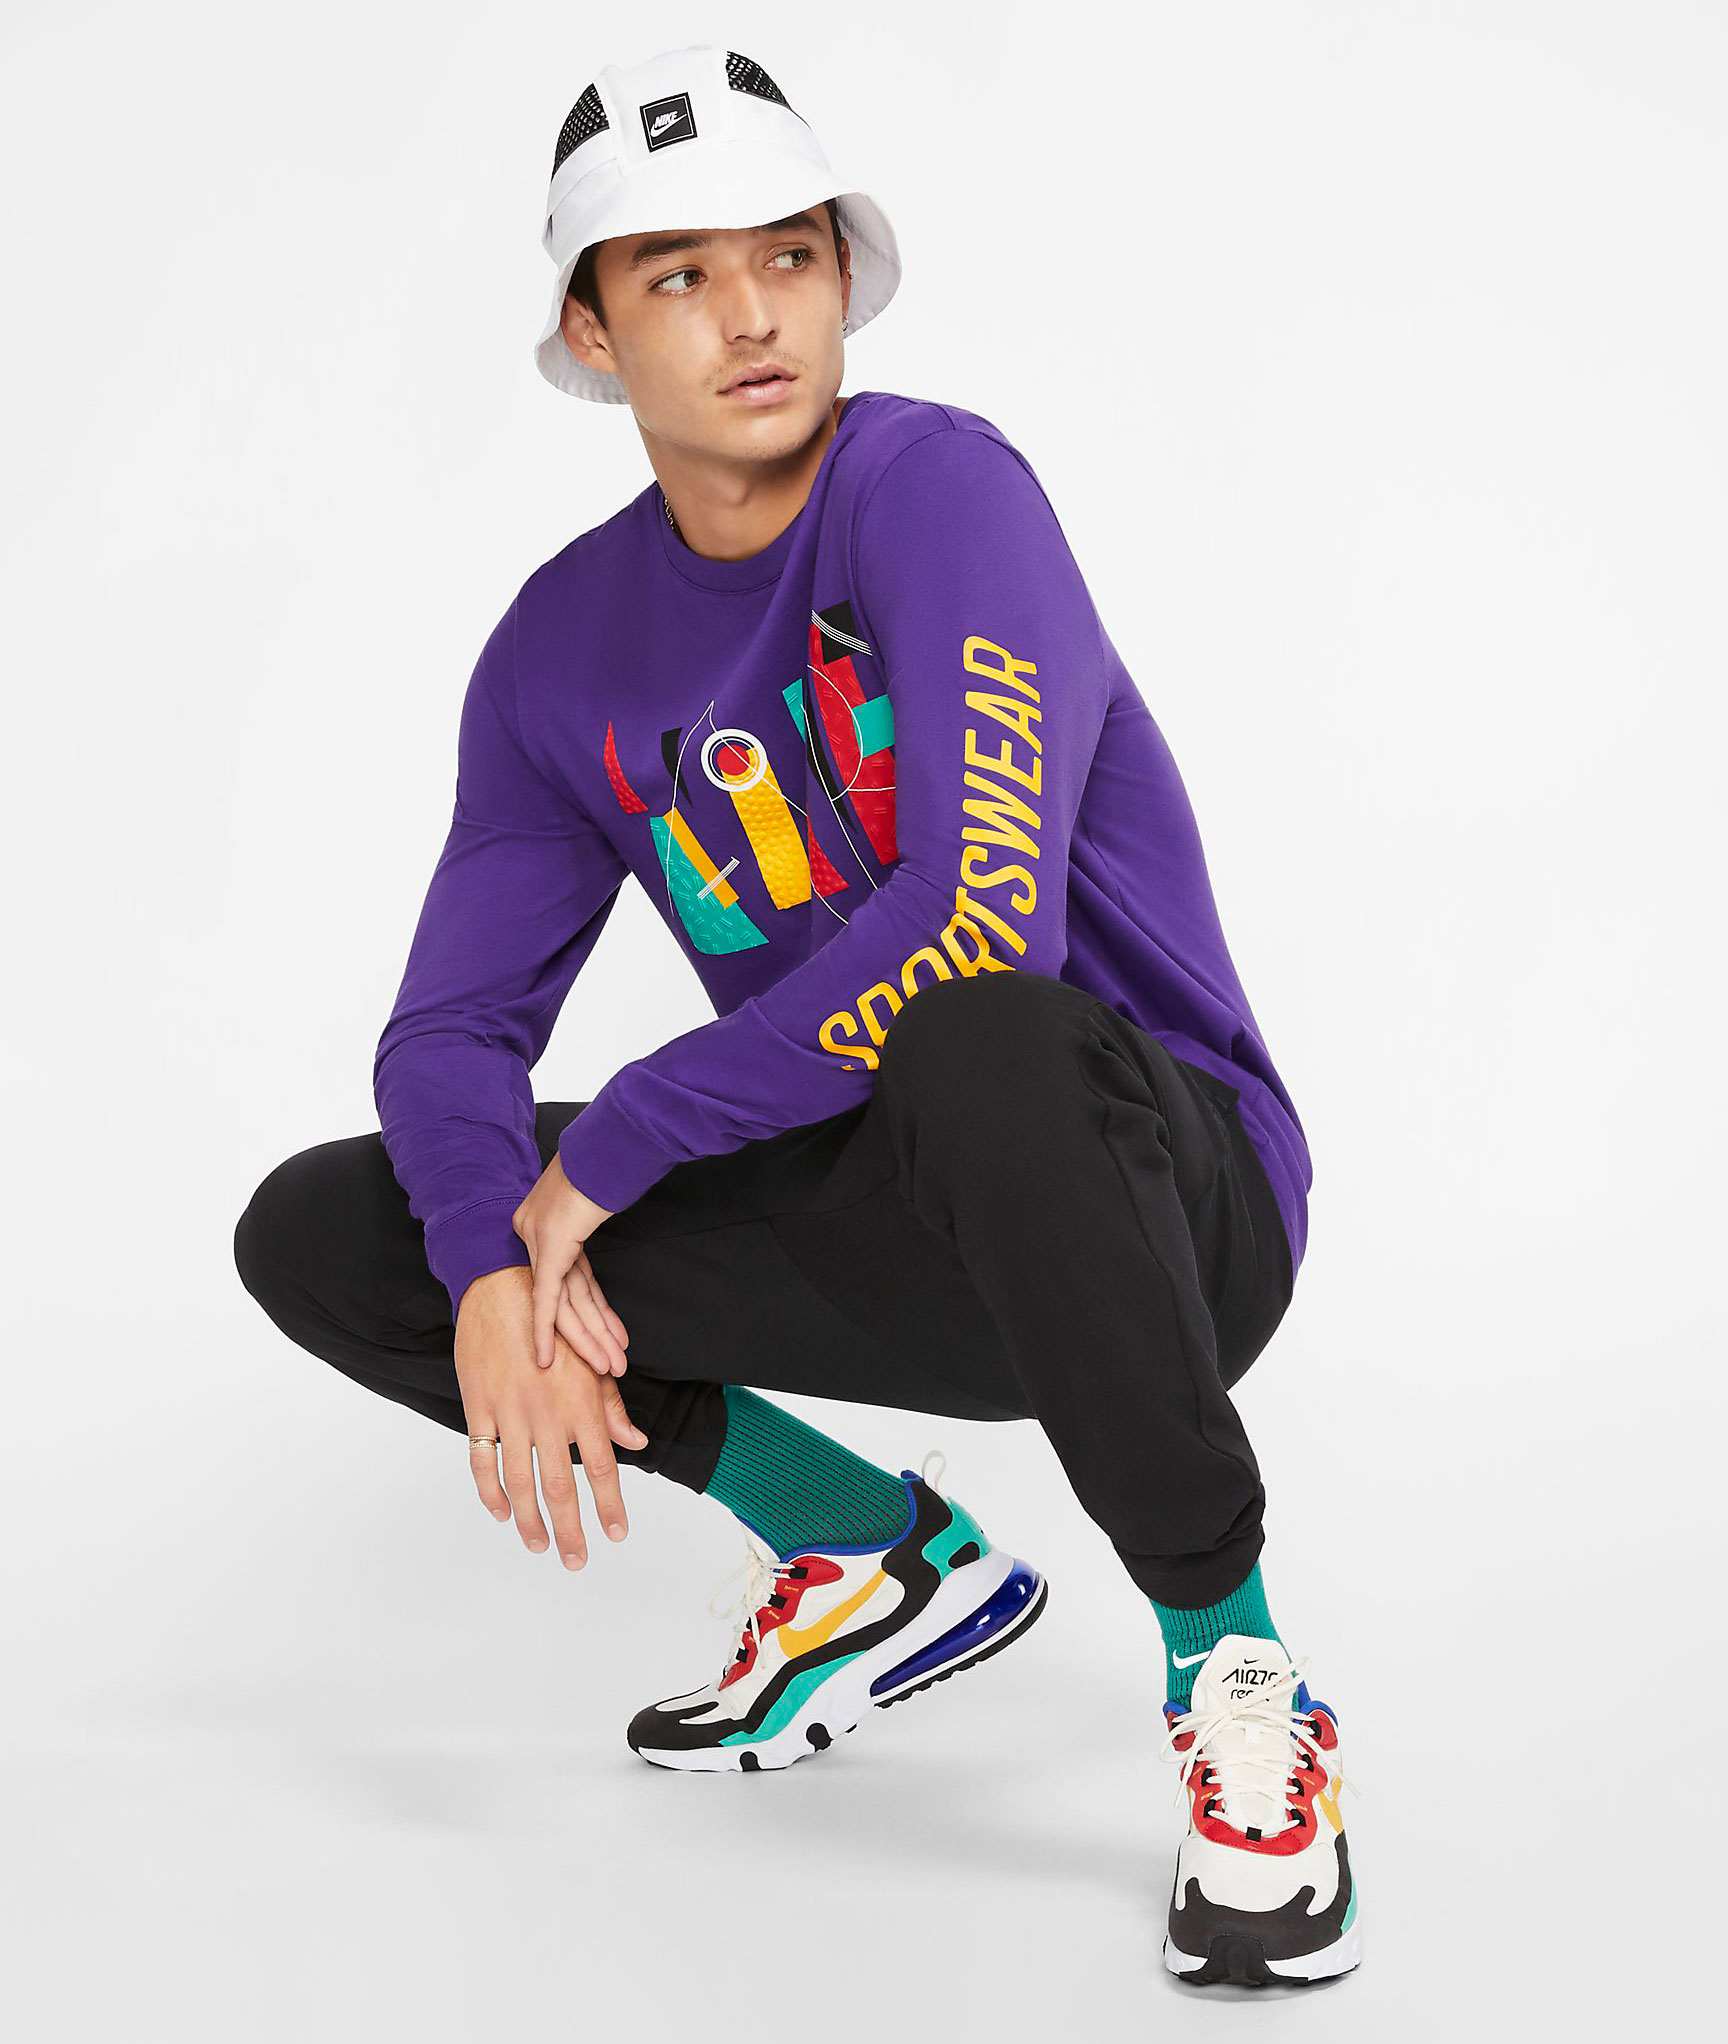 Nike Game Changer Shirt Now Available in Purple | SneakerFits.com